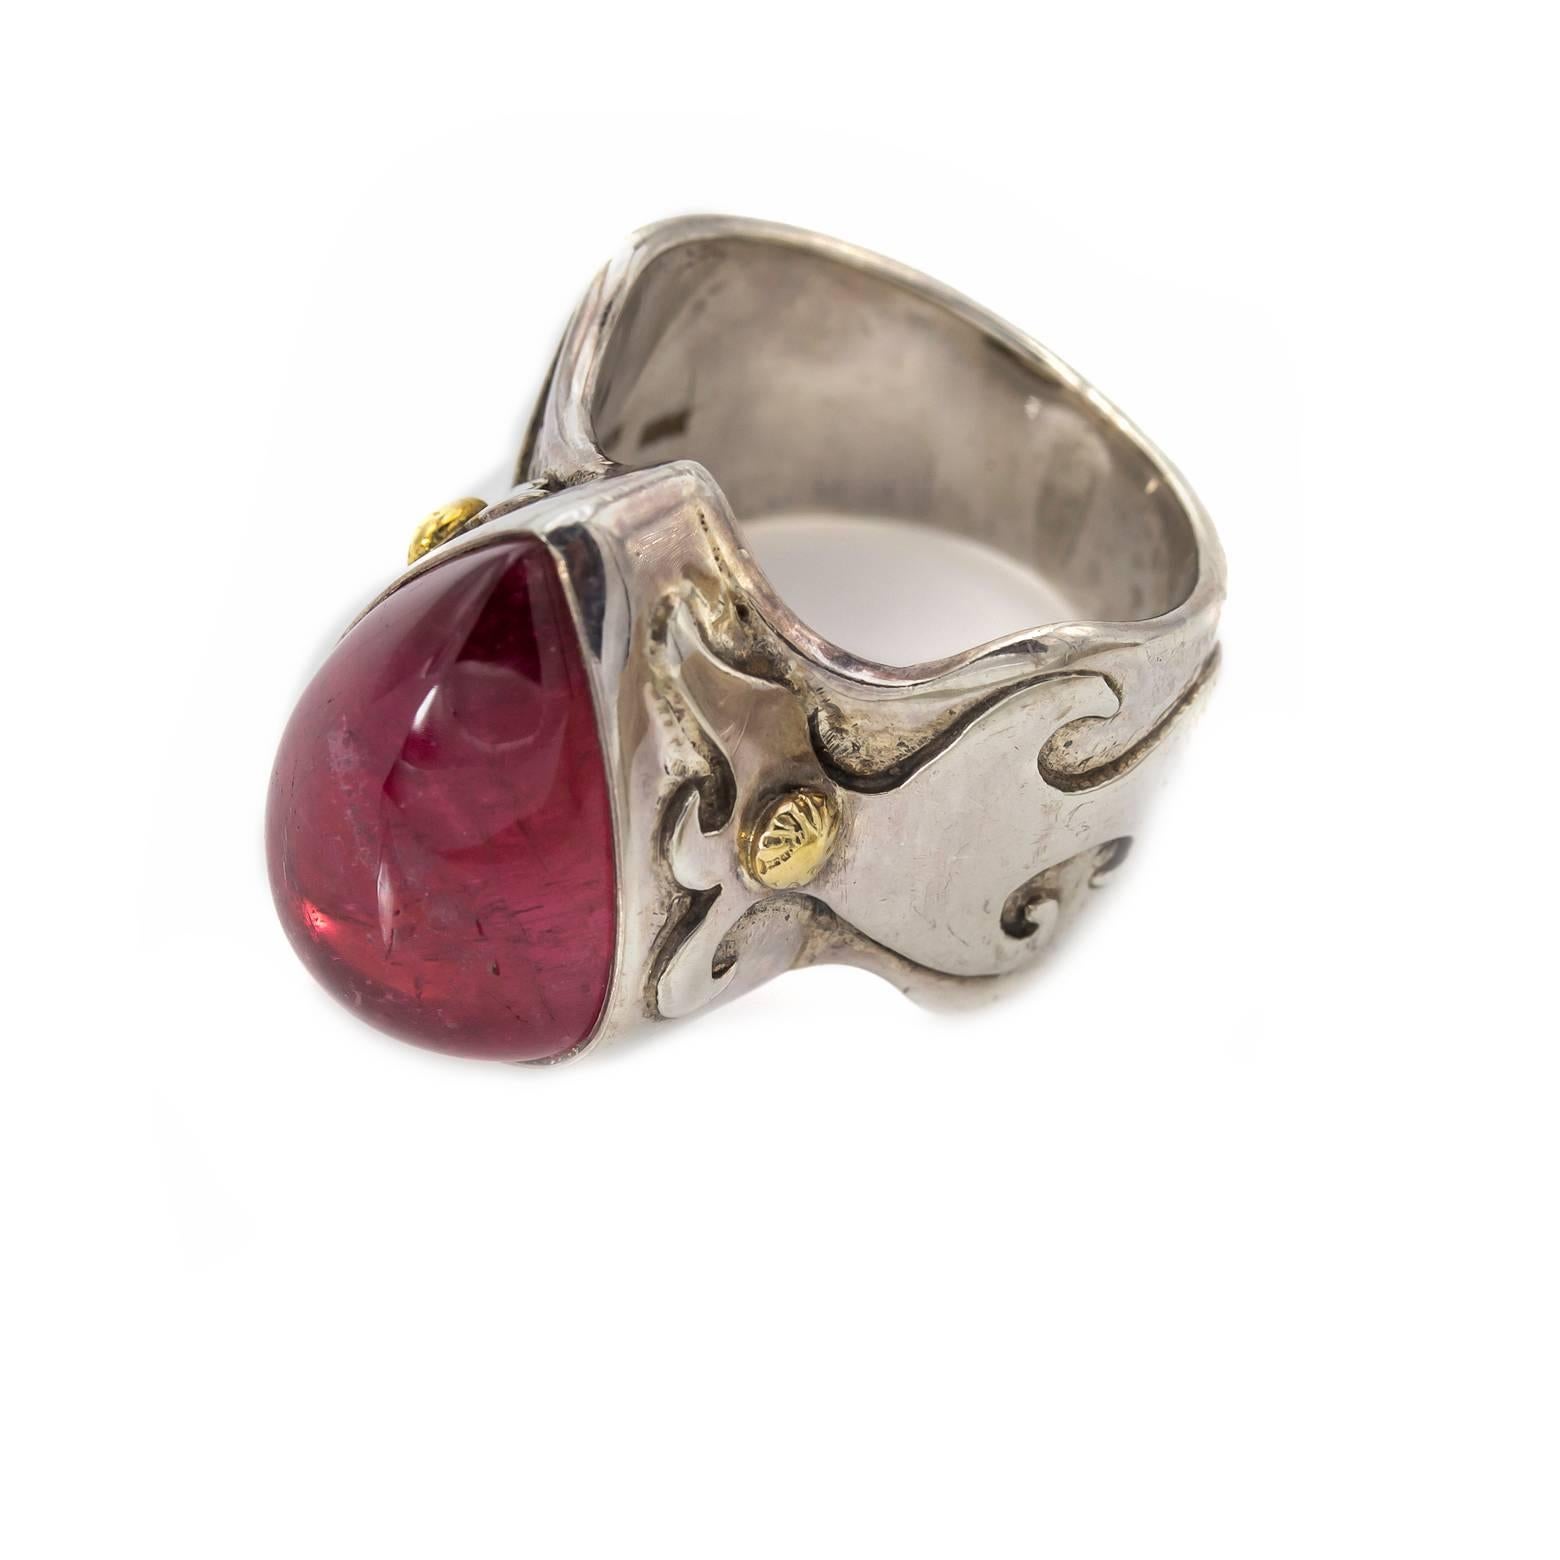 Women's or Men's Large Tear Drop Pink Tourmaline Ring in Silver and Gold